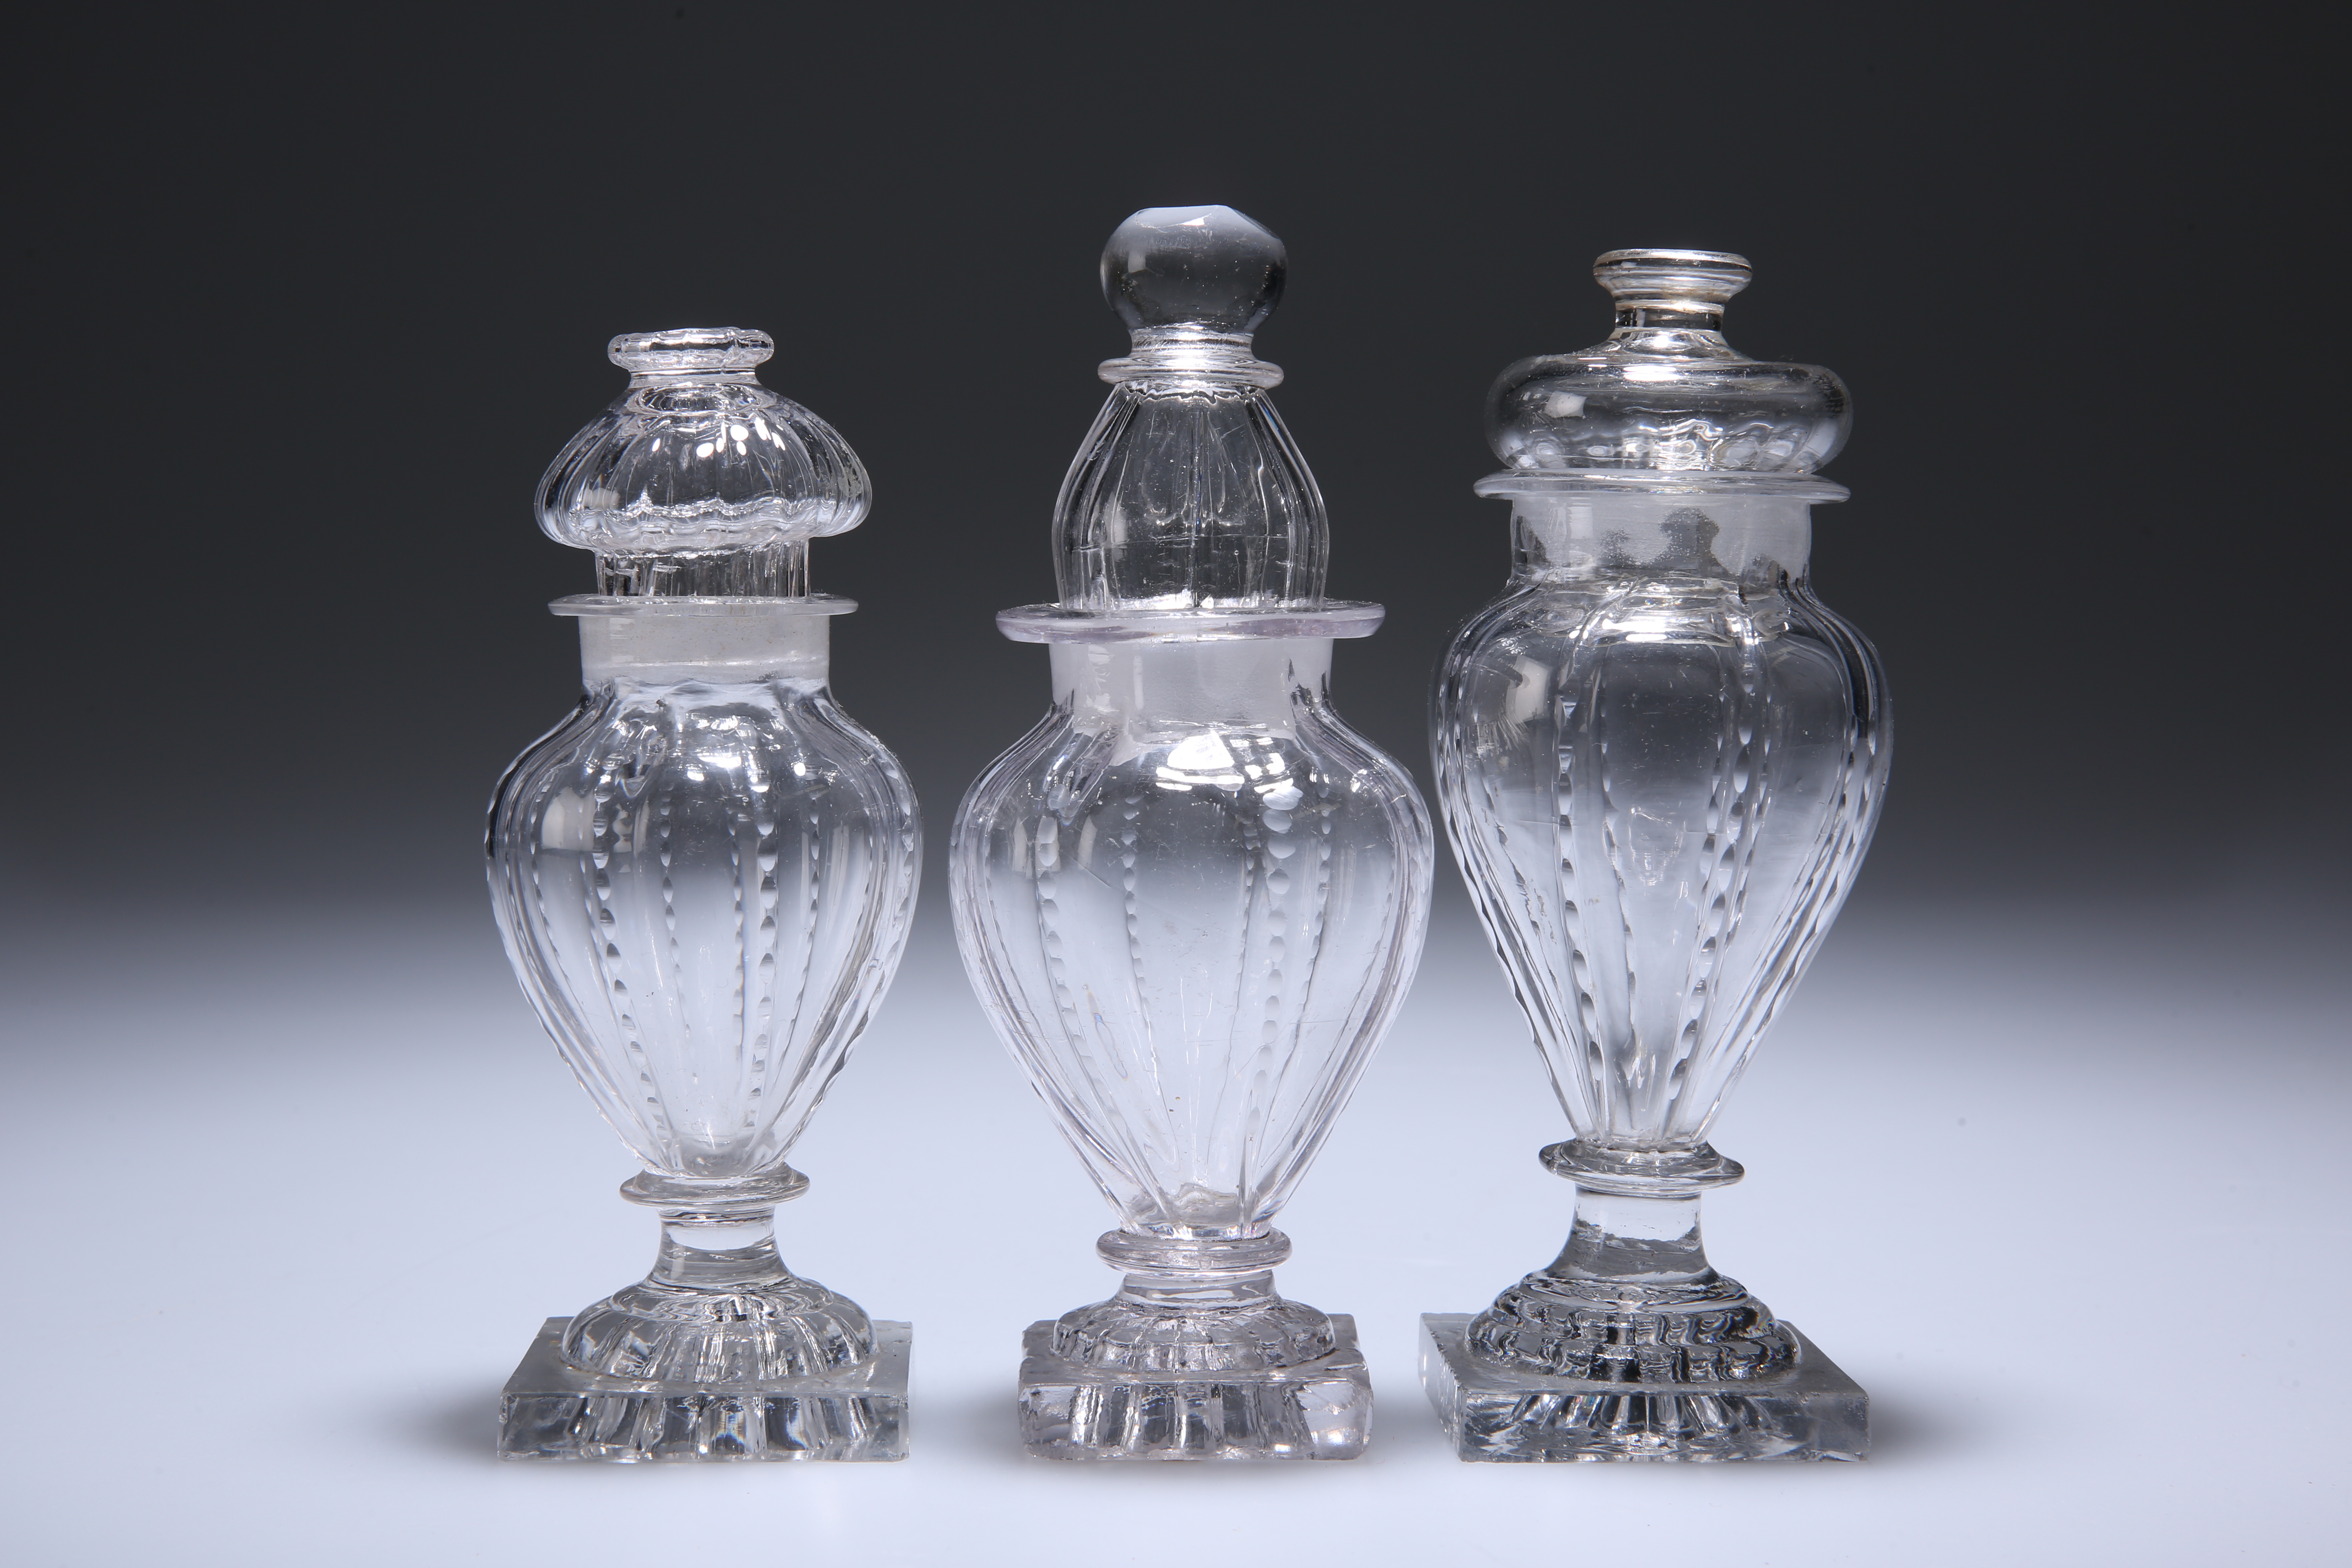 THREE ENGLISH GLASS CONDIMENT BOTTLES AND STOPPERS, CIRCA 1800